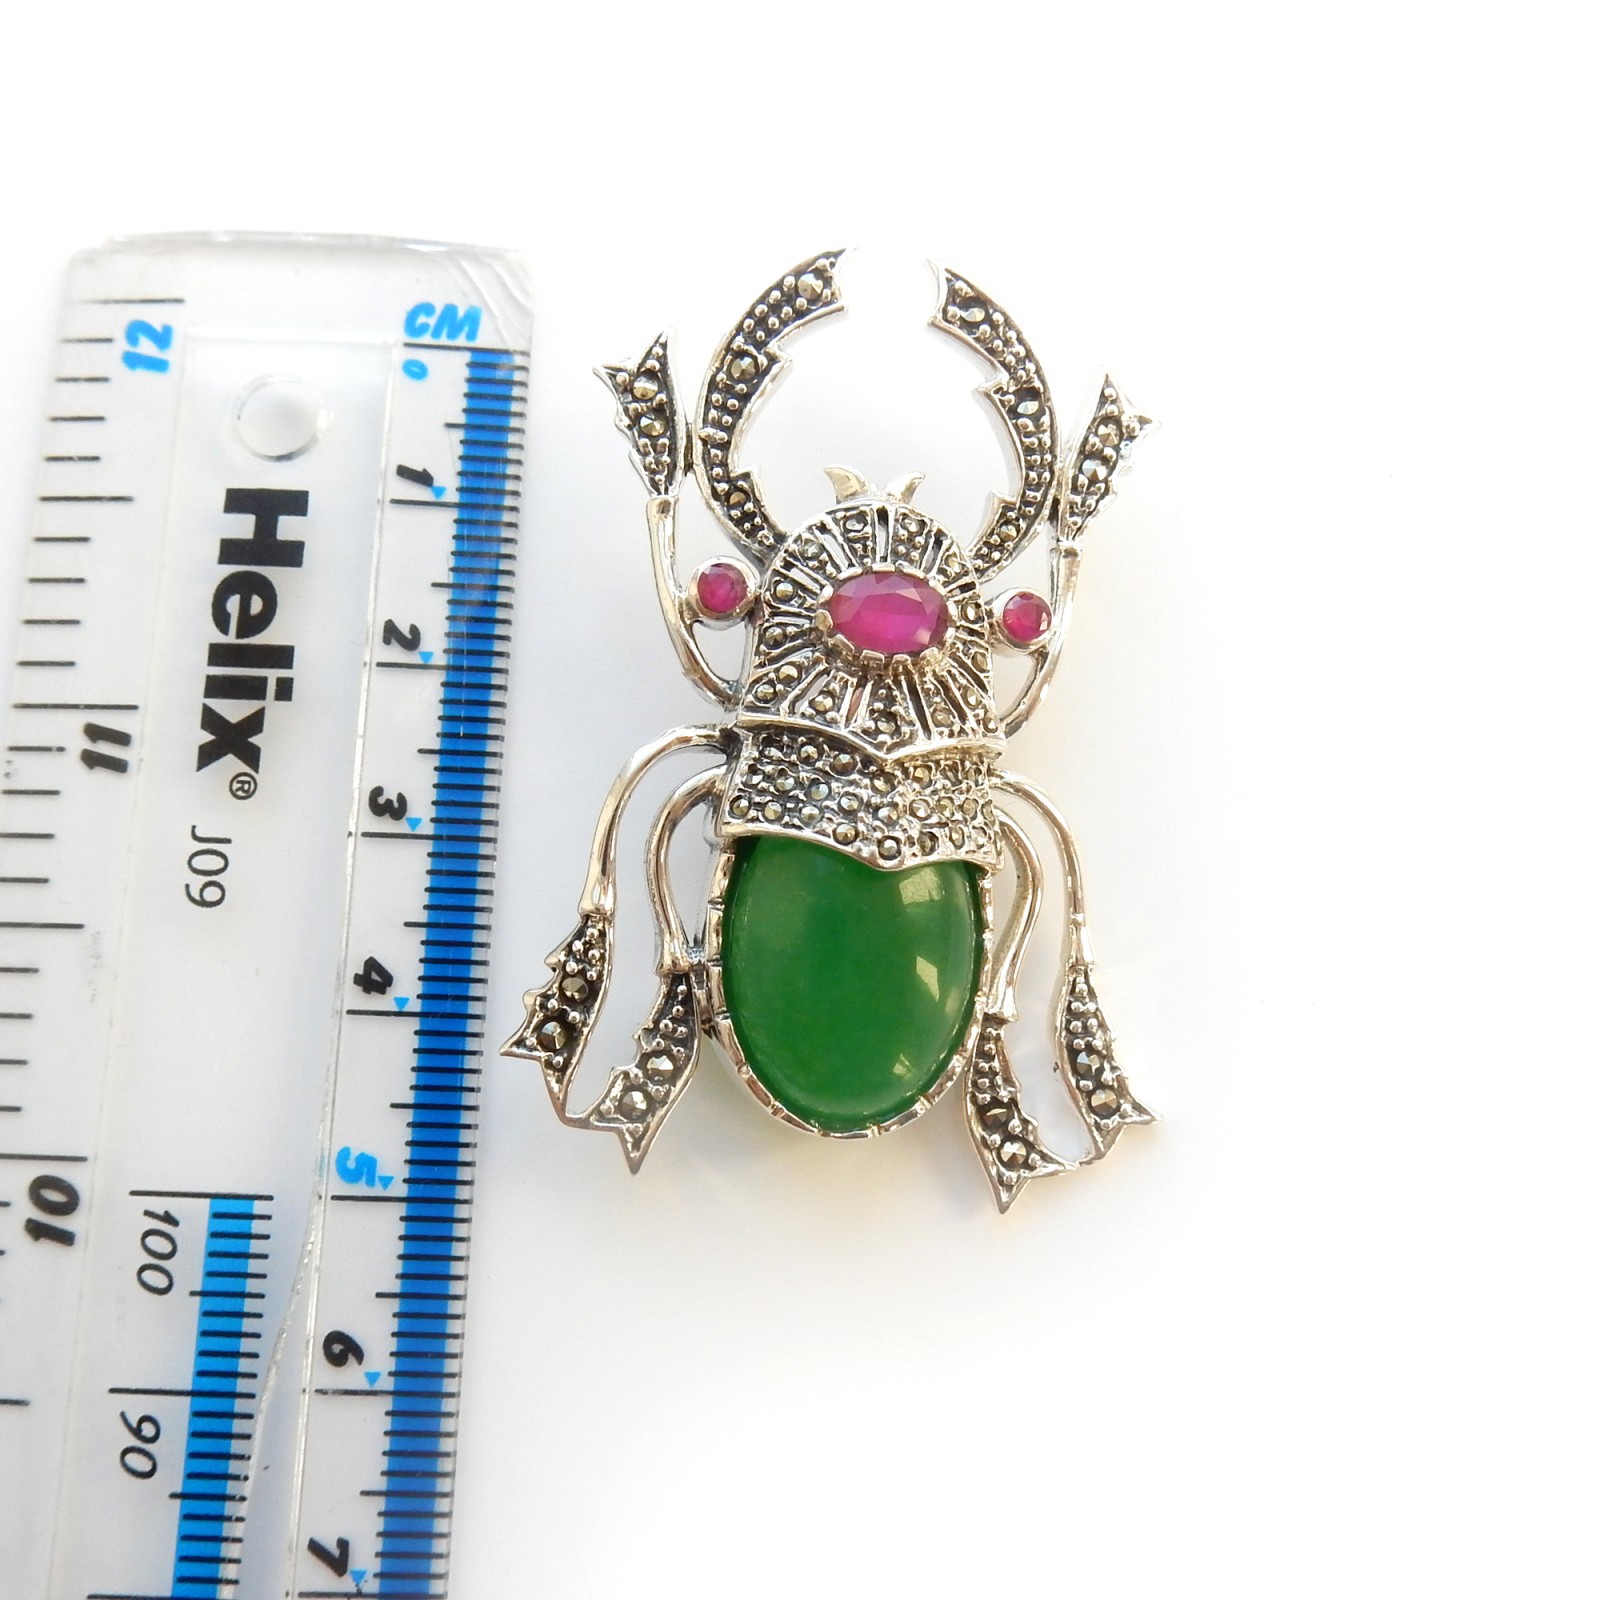 Marcasite Insect Earrings